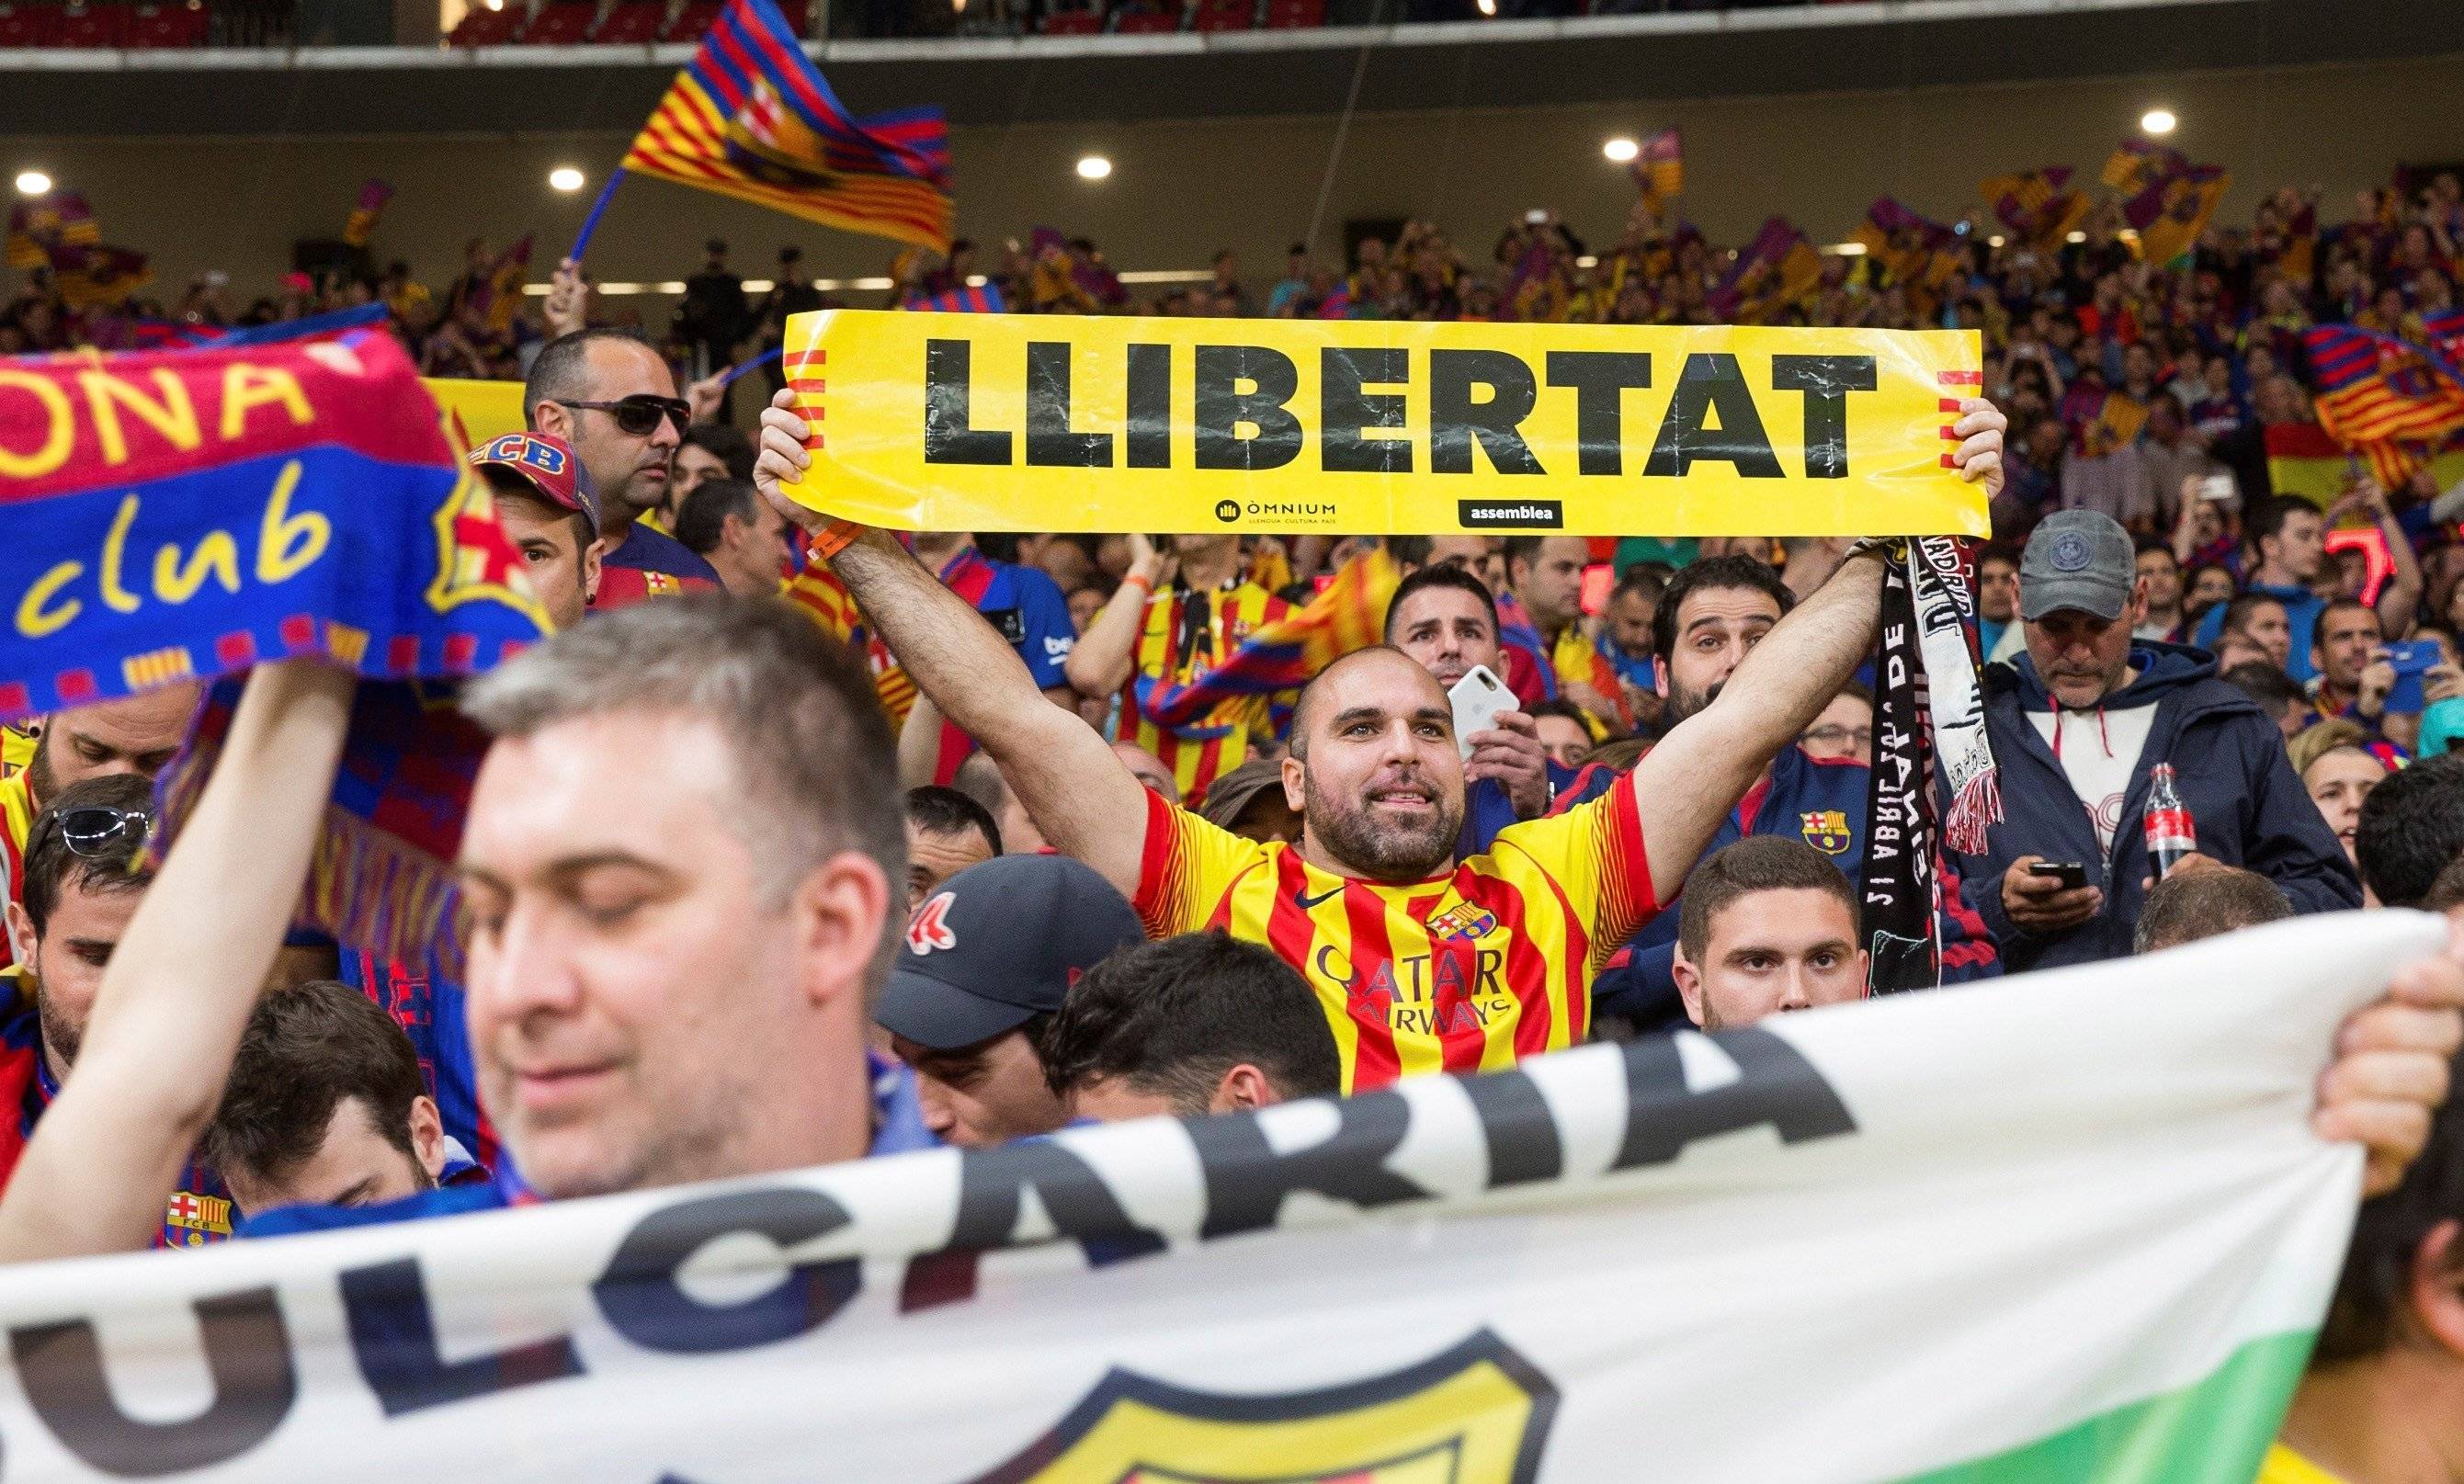 International media see yellow, the colour Spain banned at a football cup final